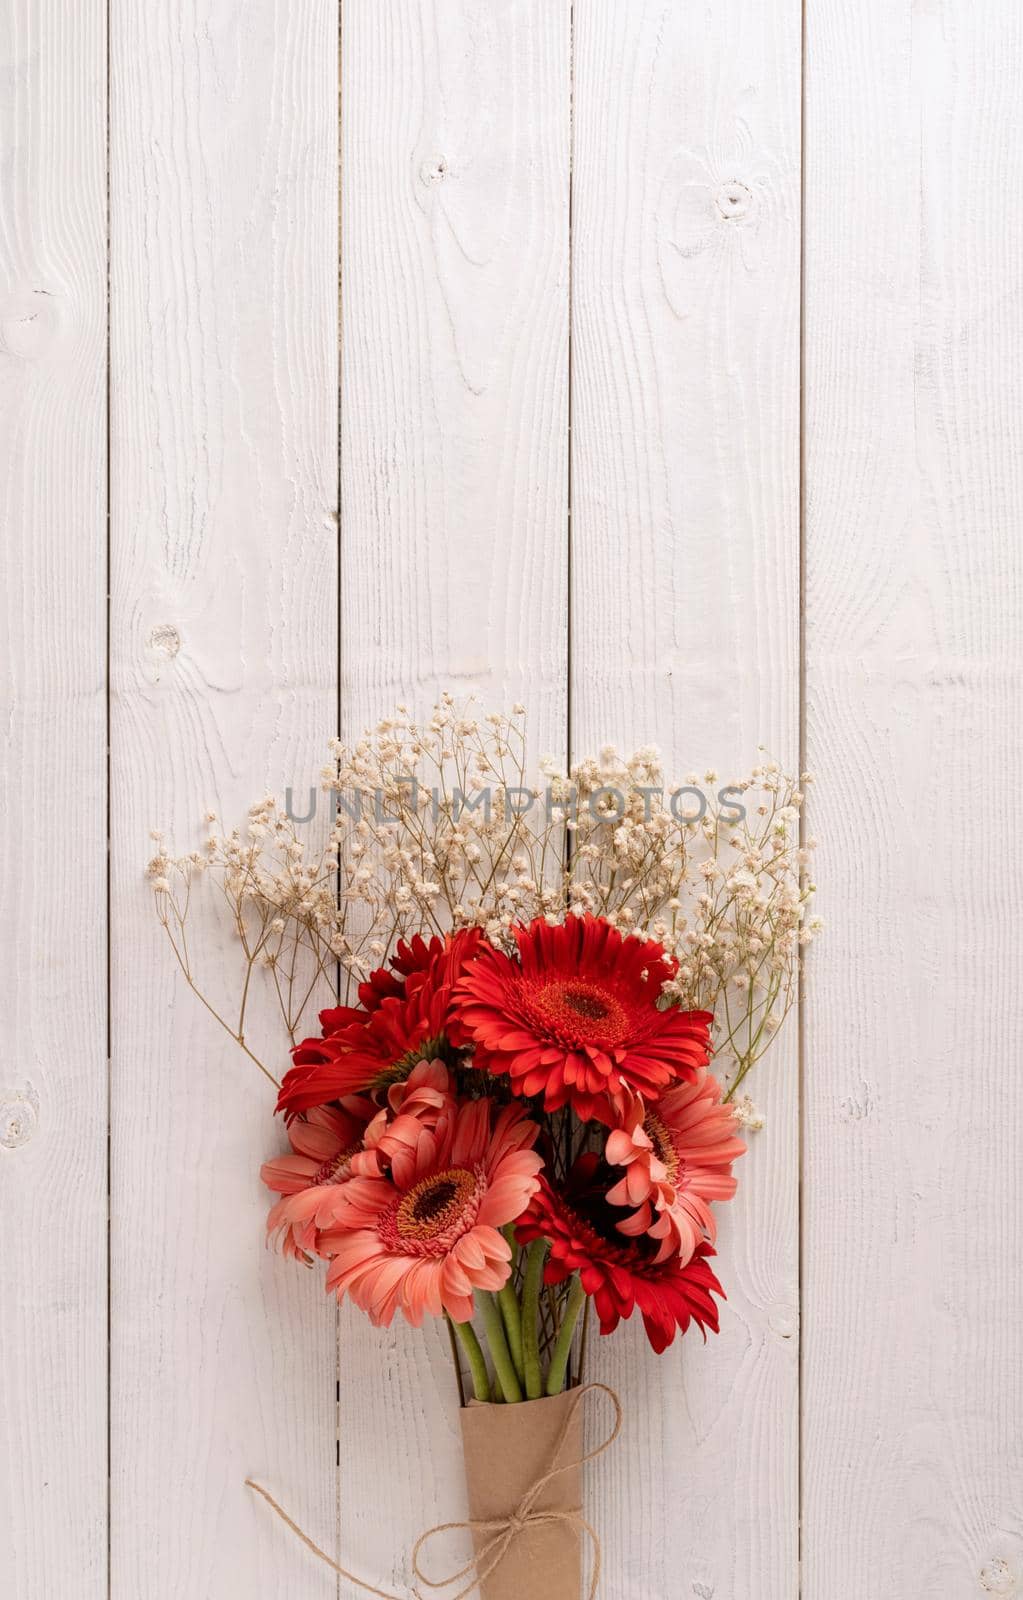 Red gerbera daisy flowers on white wooden table by Desperada